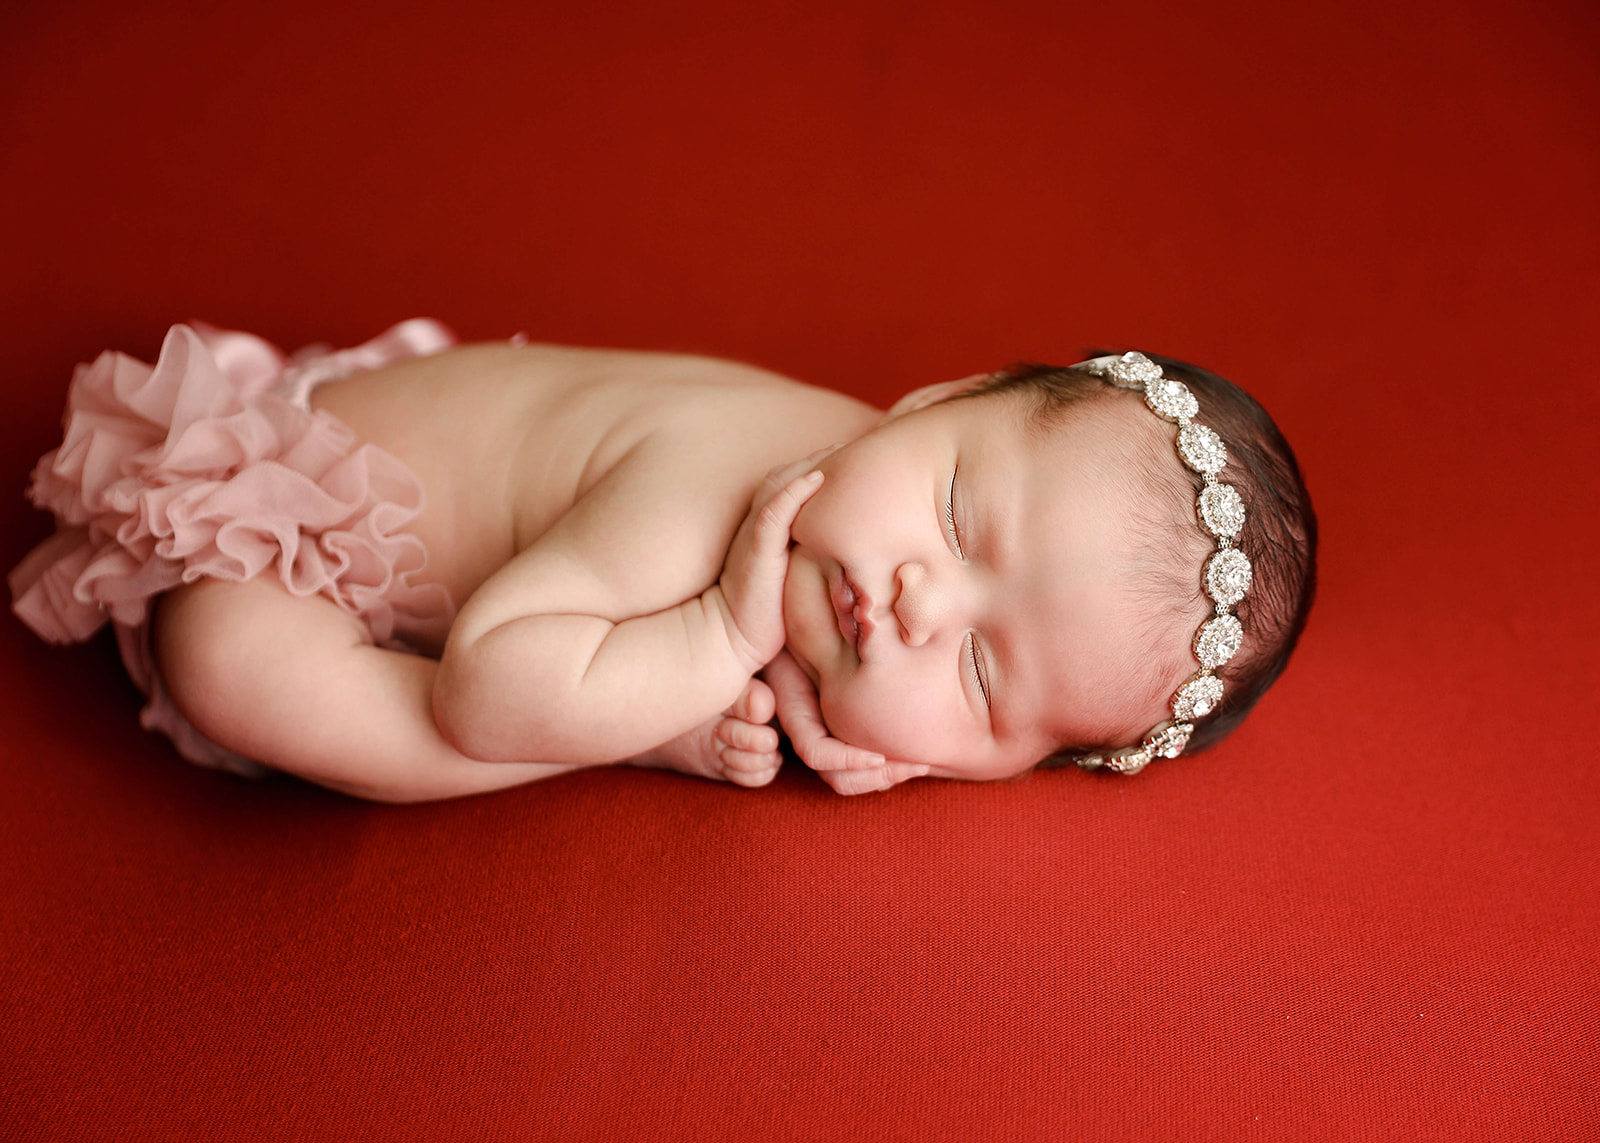 A newborn baby sleeps on a red bed with hands on her face wearing a pink tu tu Los Angeles Midwives